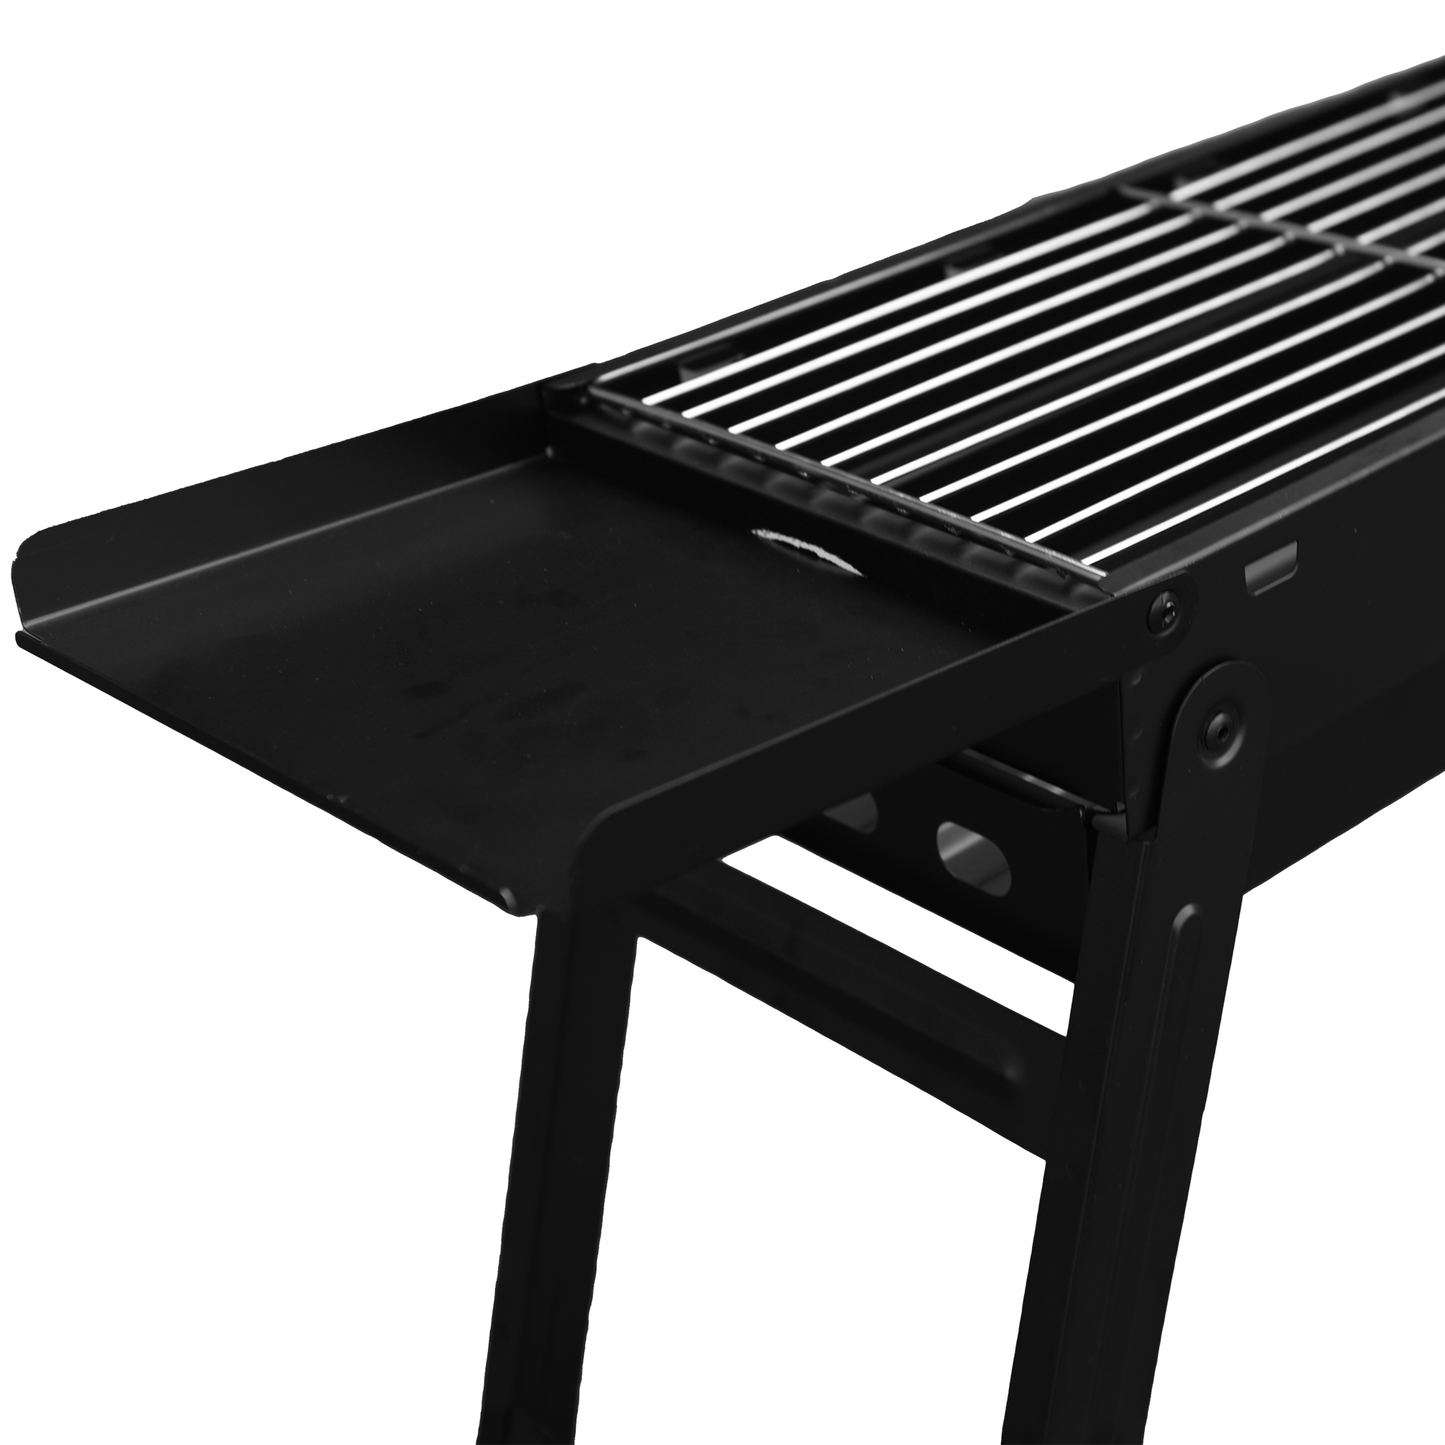 34.5" Charcoal Outdoor Portable Folding BBQ Mini-Grill